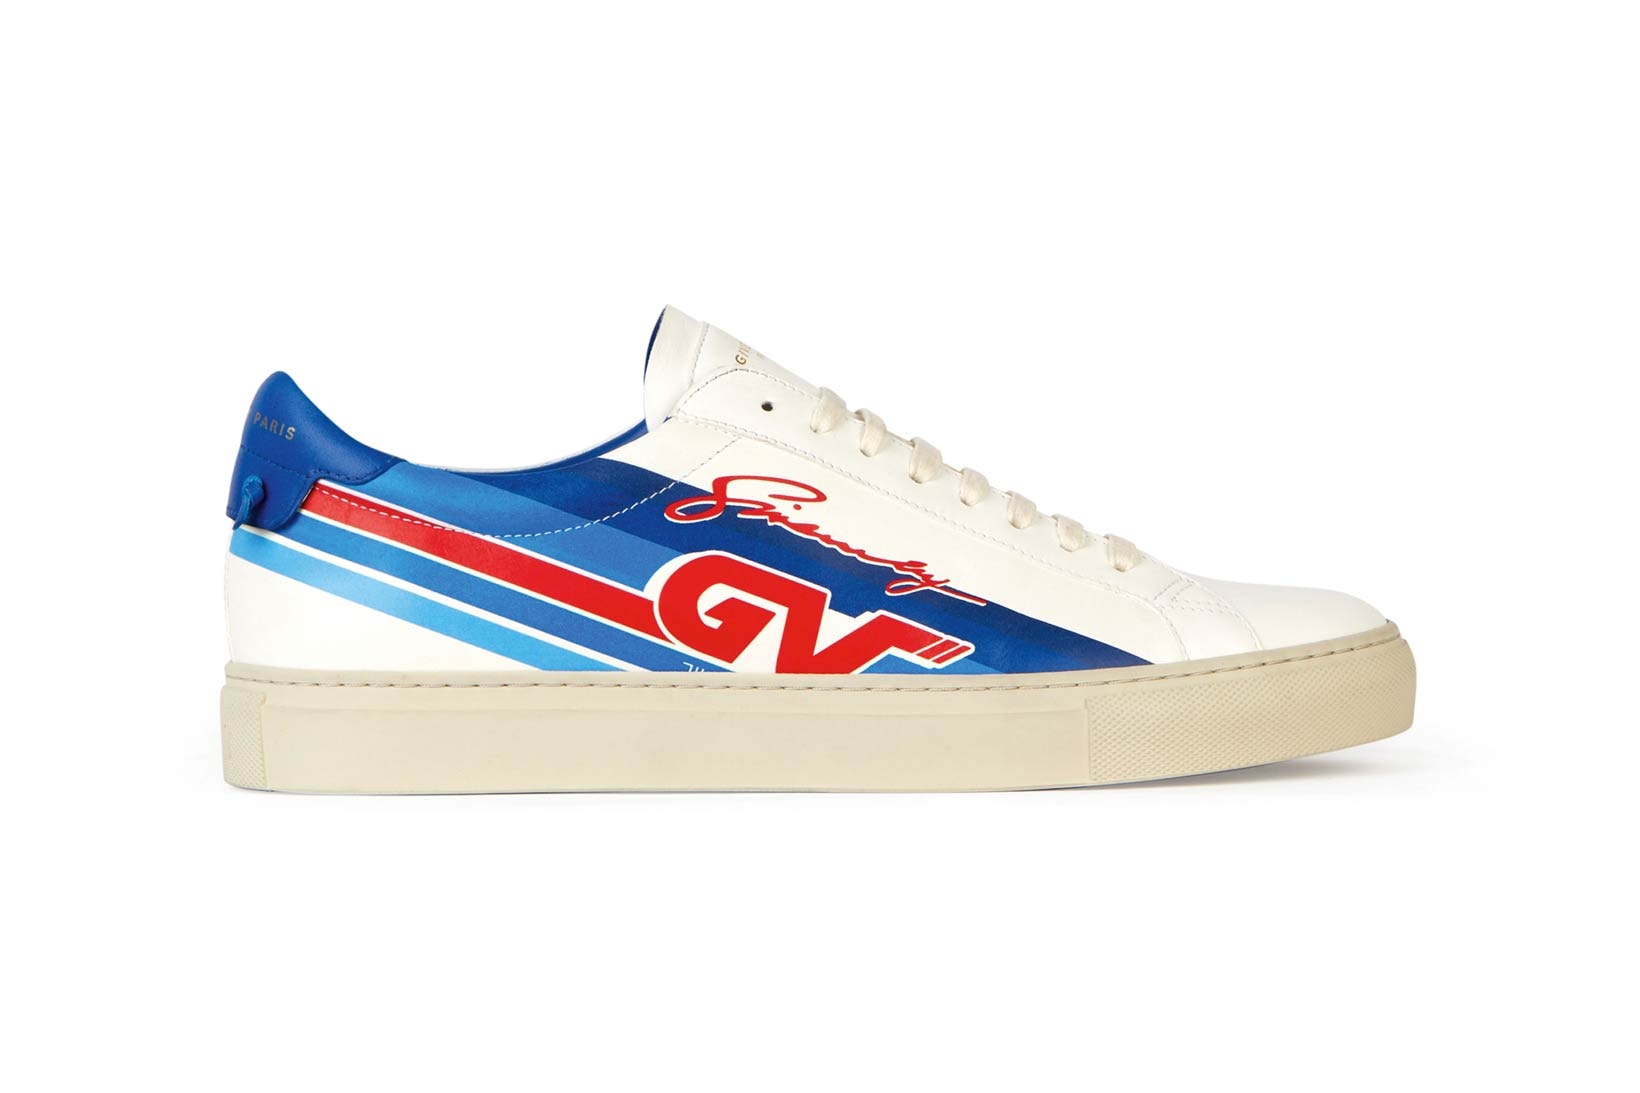 Givenchy Pre-Fall 2018 Motocross Sneakers White Blue